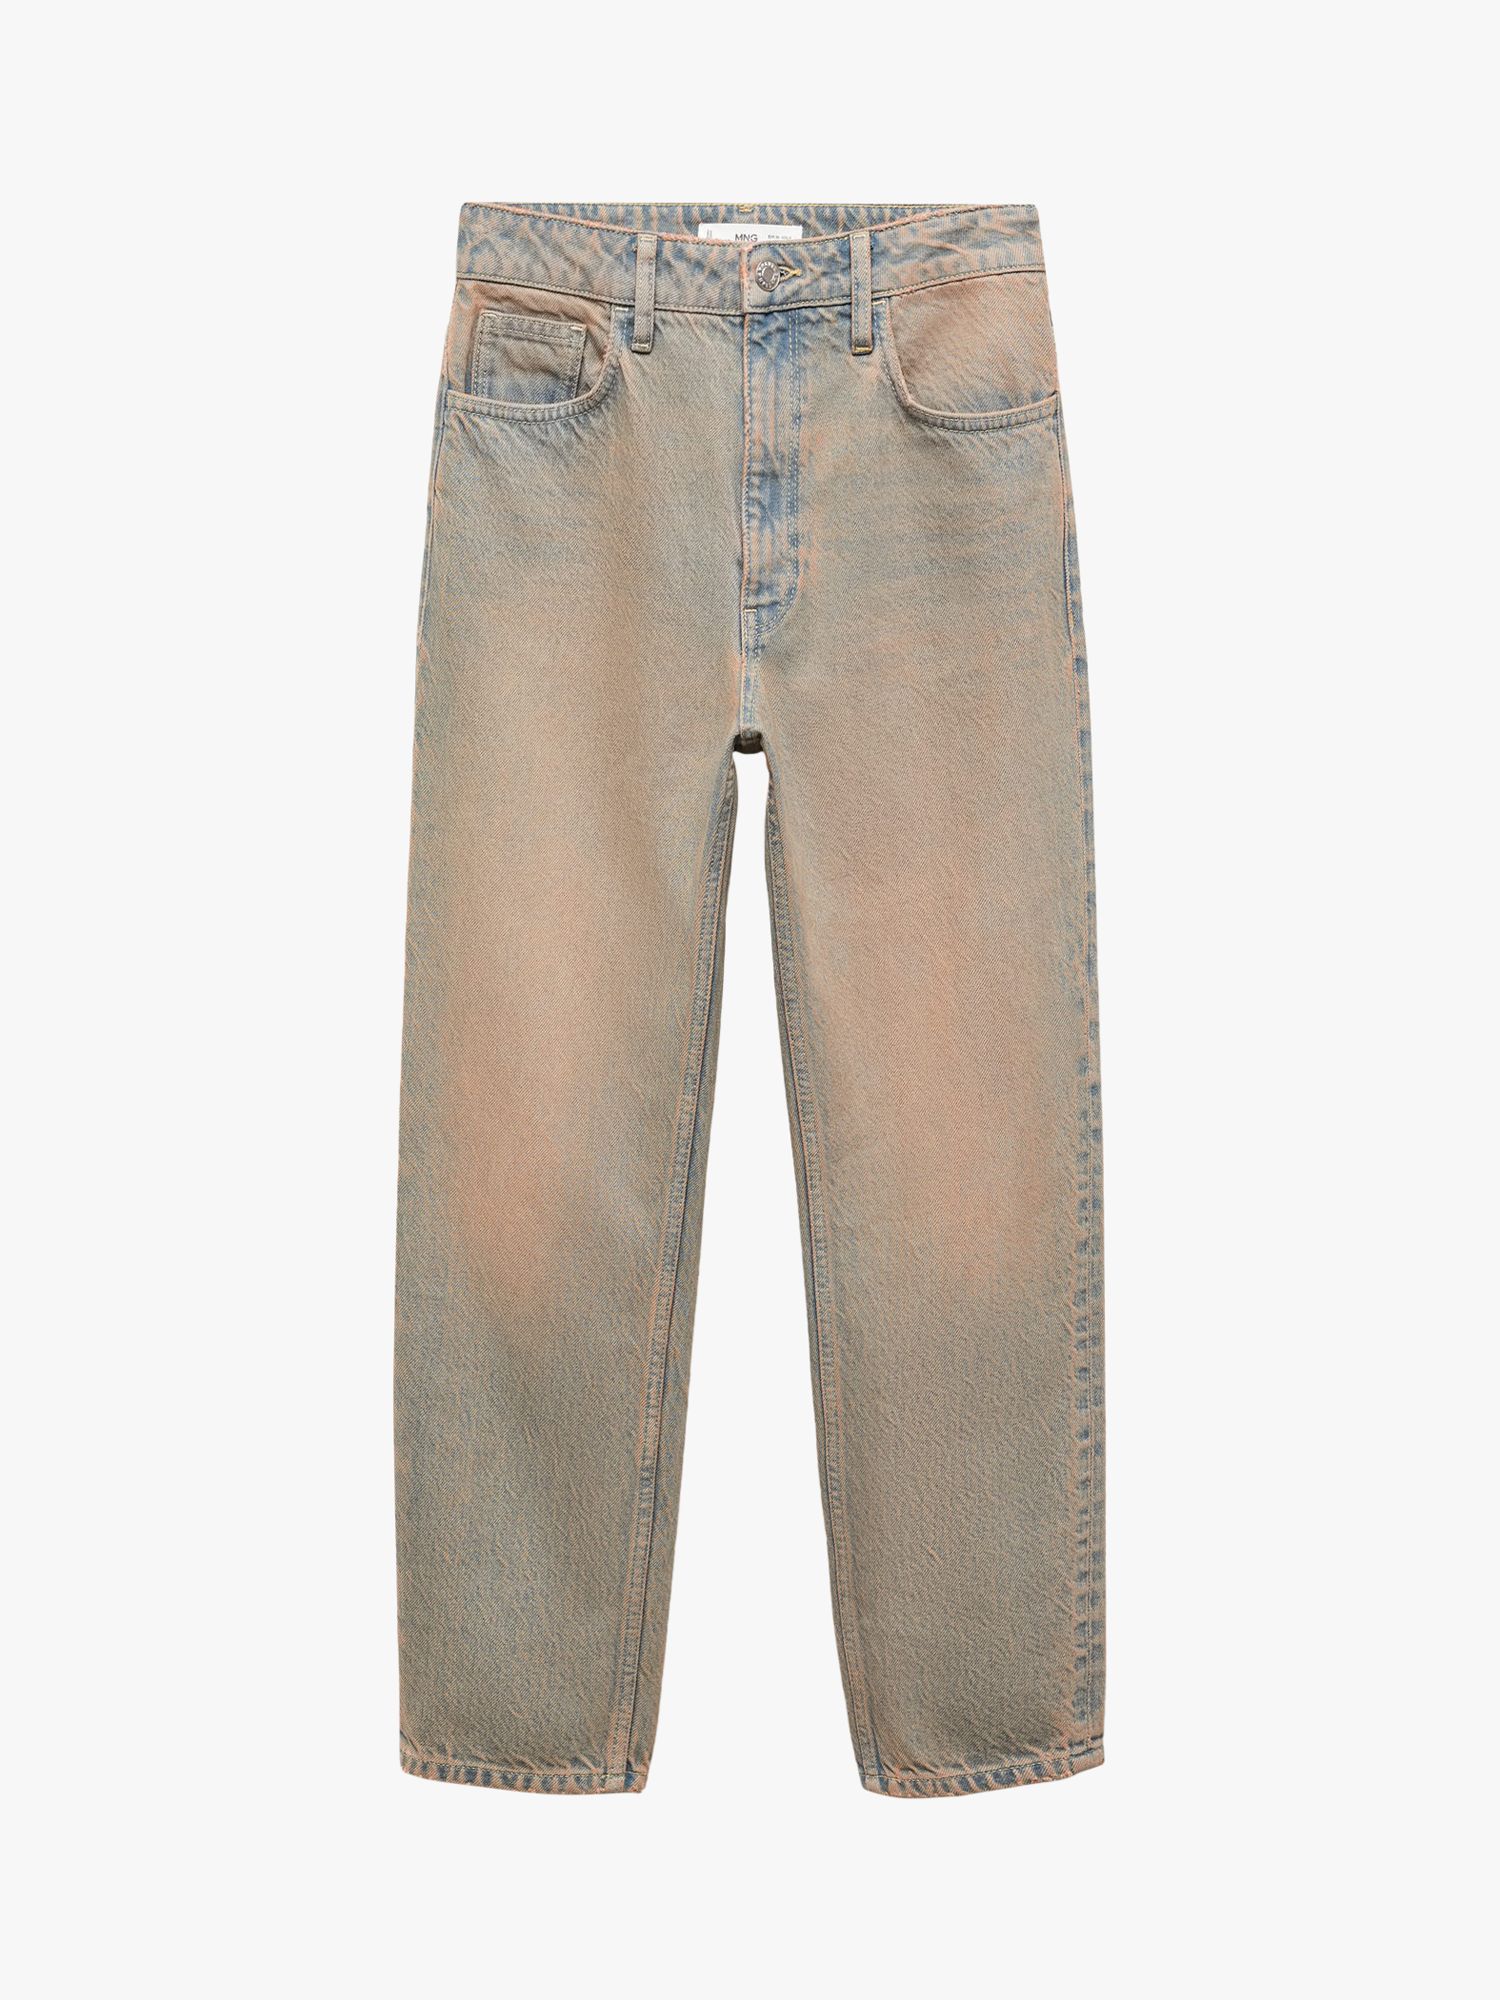 Buy Mango Cropped Mom Jeans, Open Blue Online at johnlewis.com